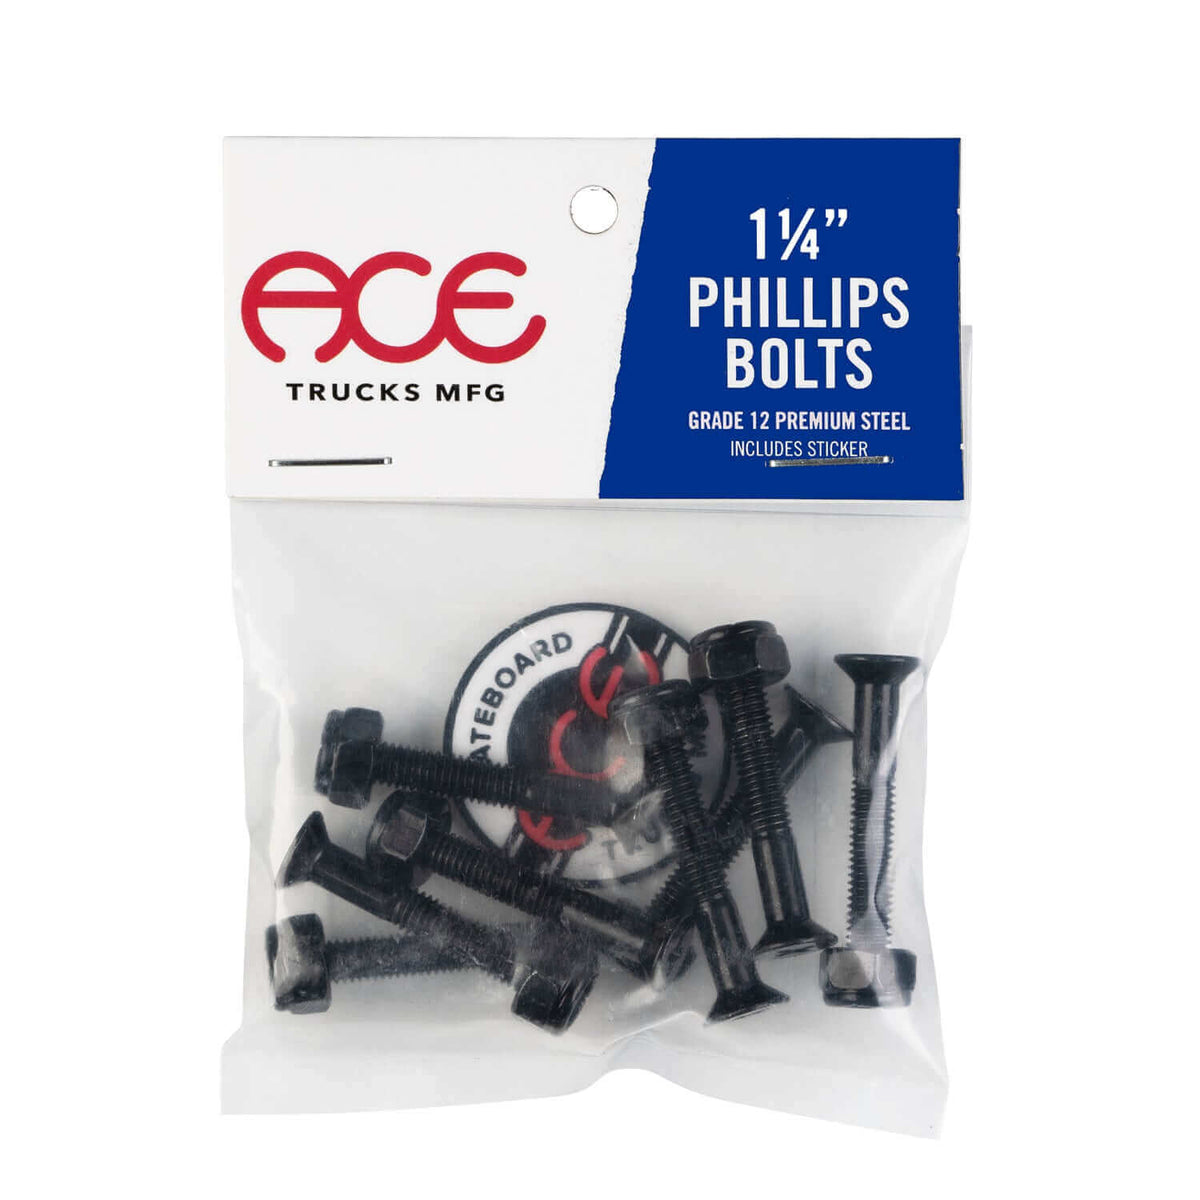 Ace 1 1/4" Phillips Bolts